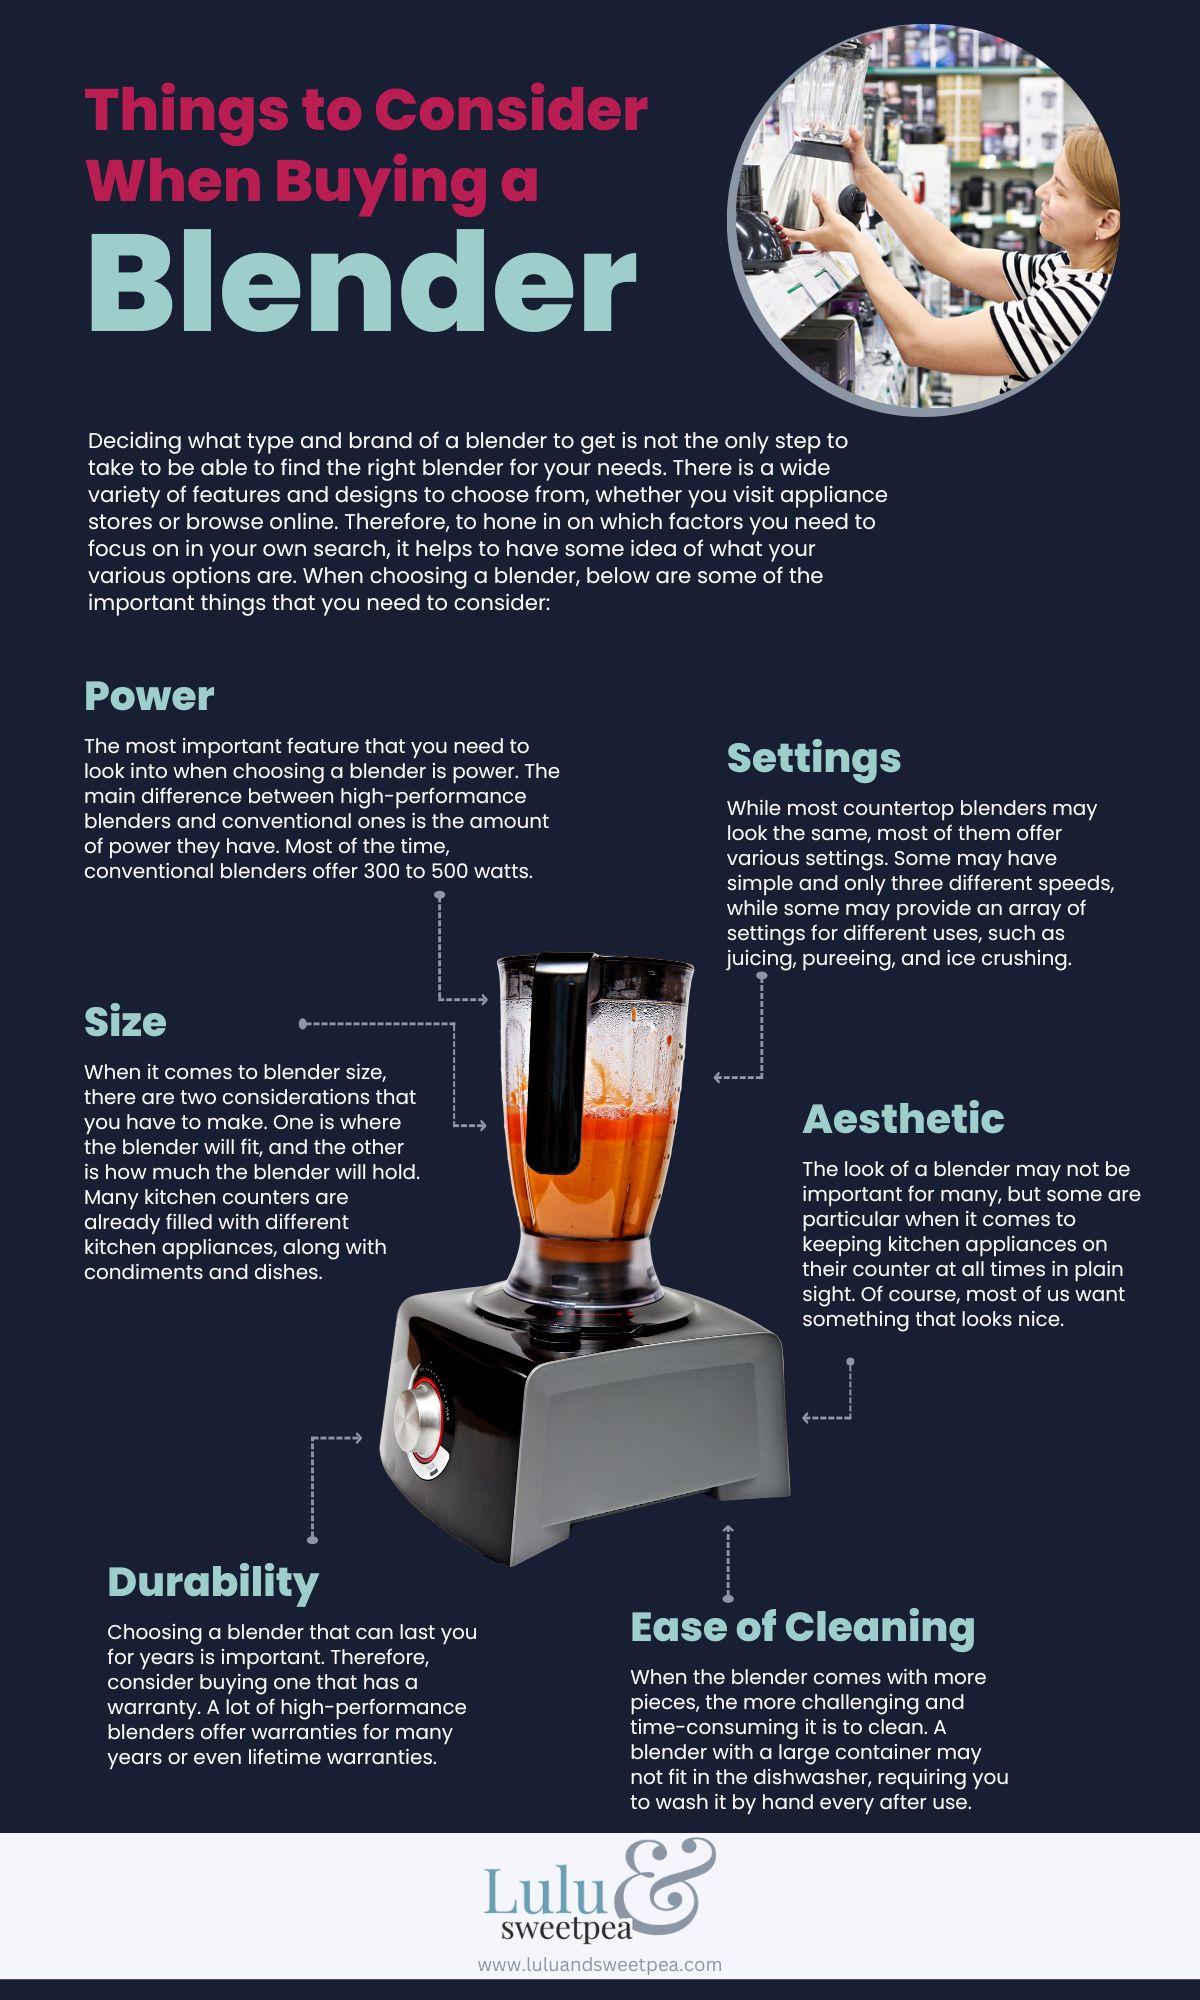 Things to Consider When Buying a Blender